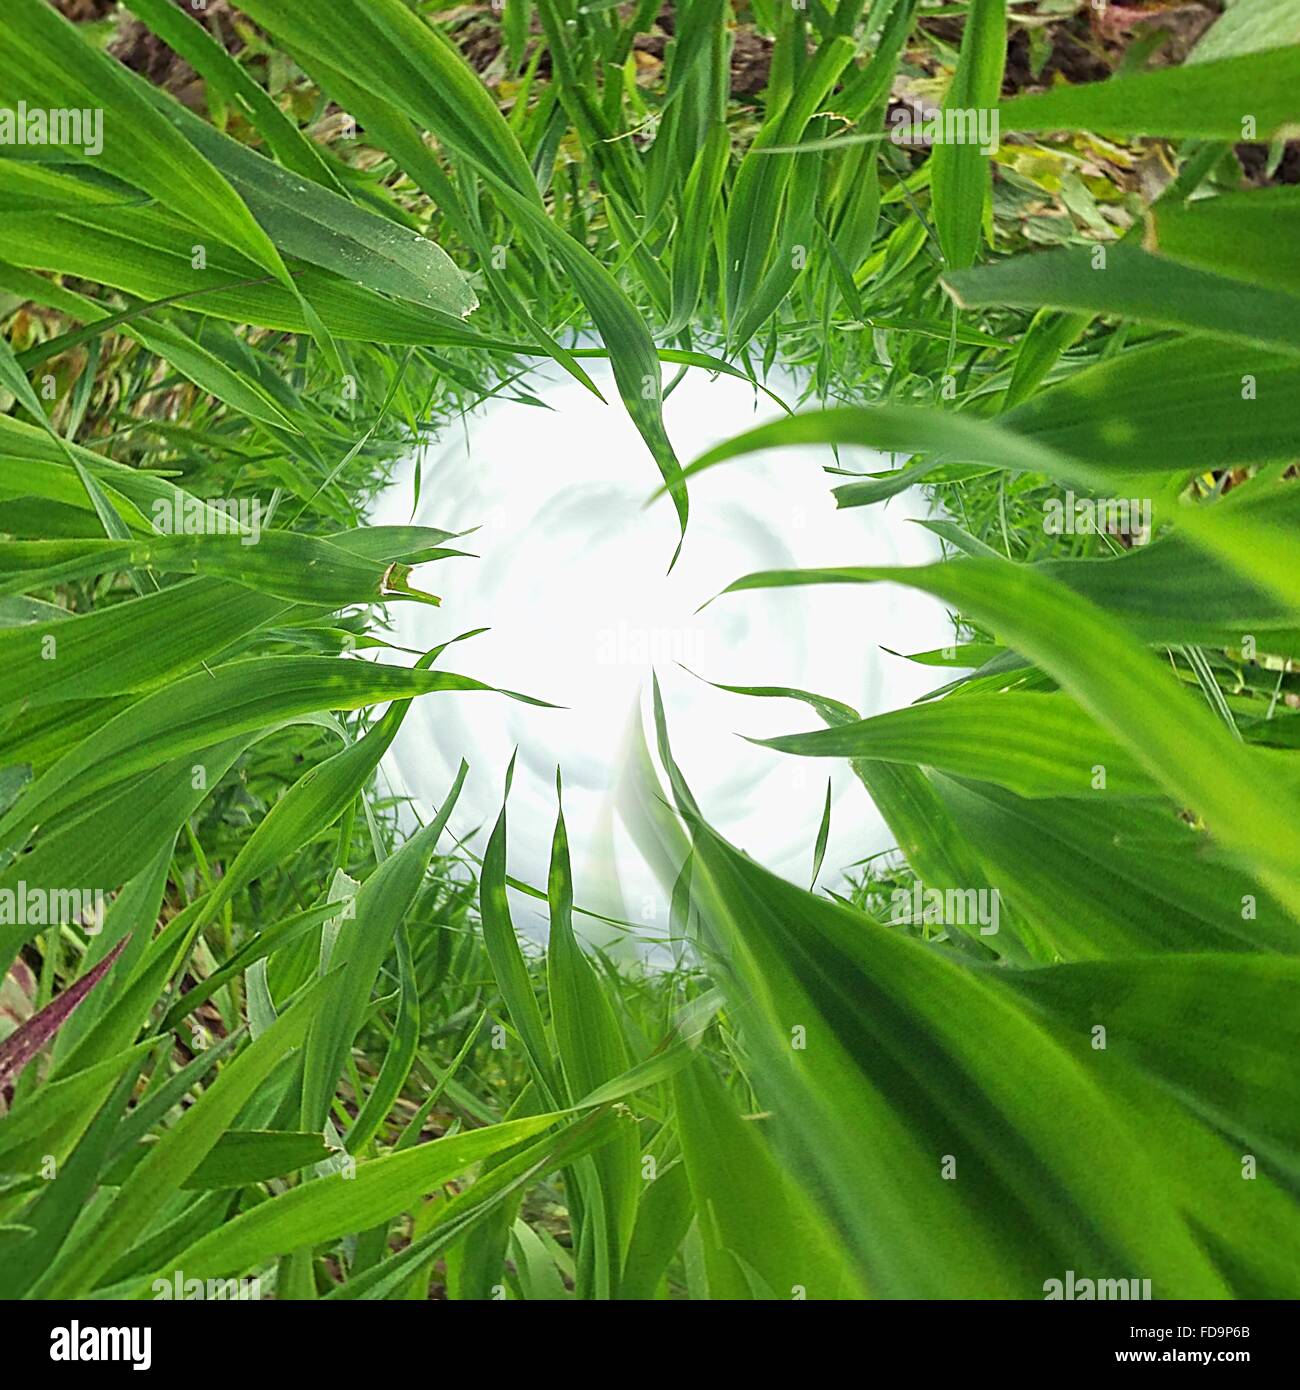 Digitally Altered Image Of Grass Stock Photo